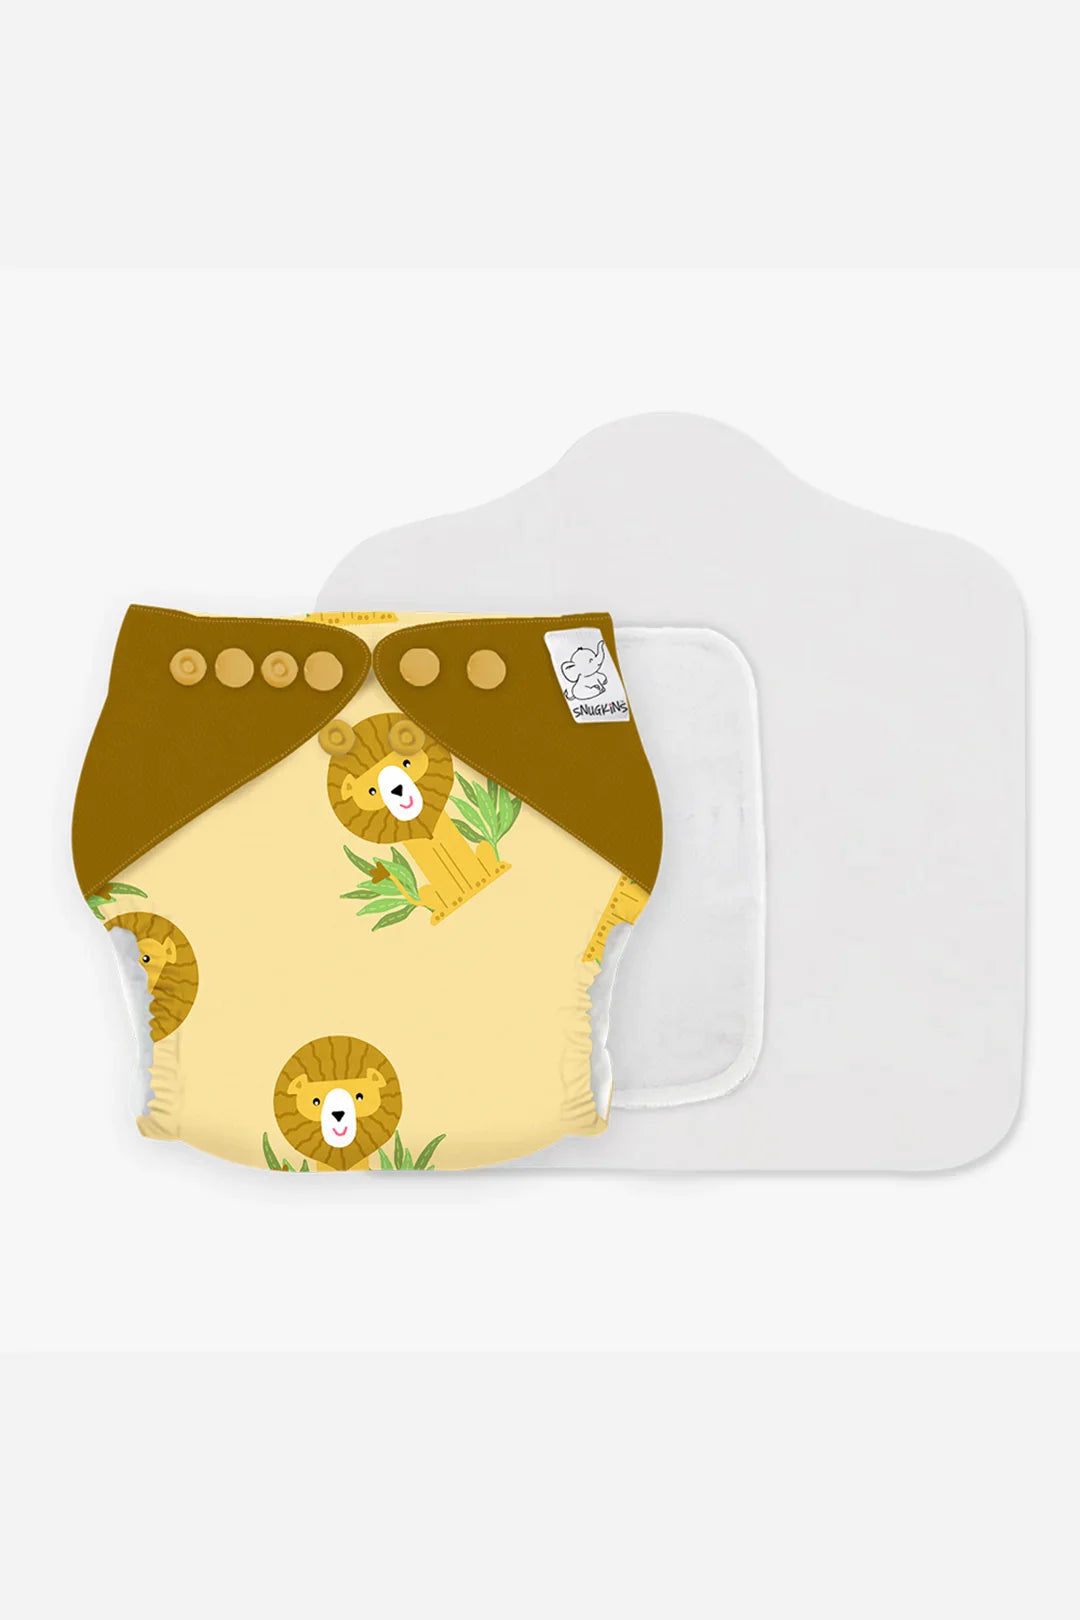 Lion Hearted Cloth Diaper for Babies